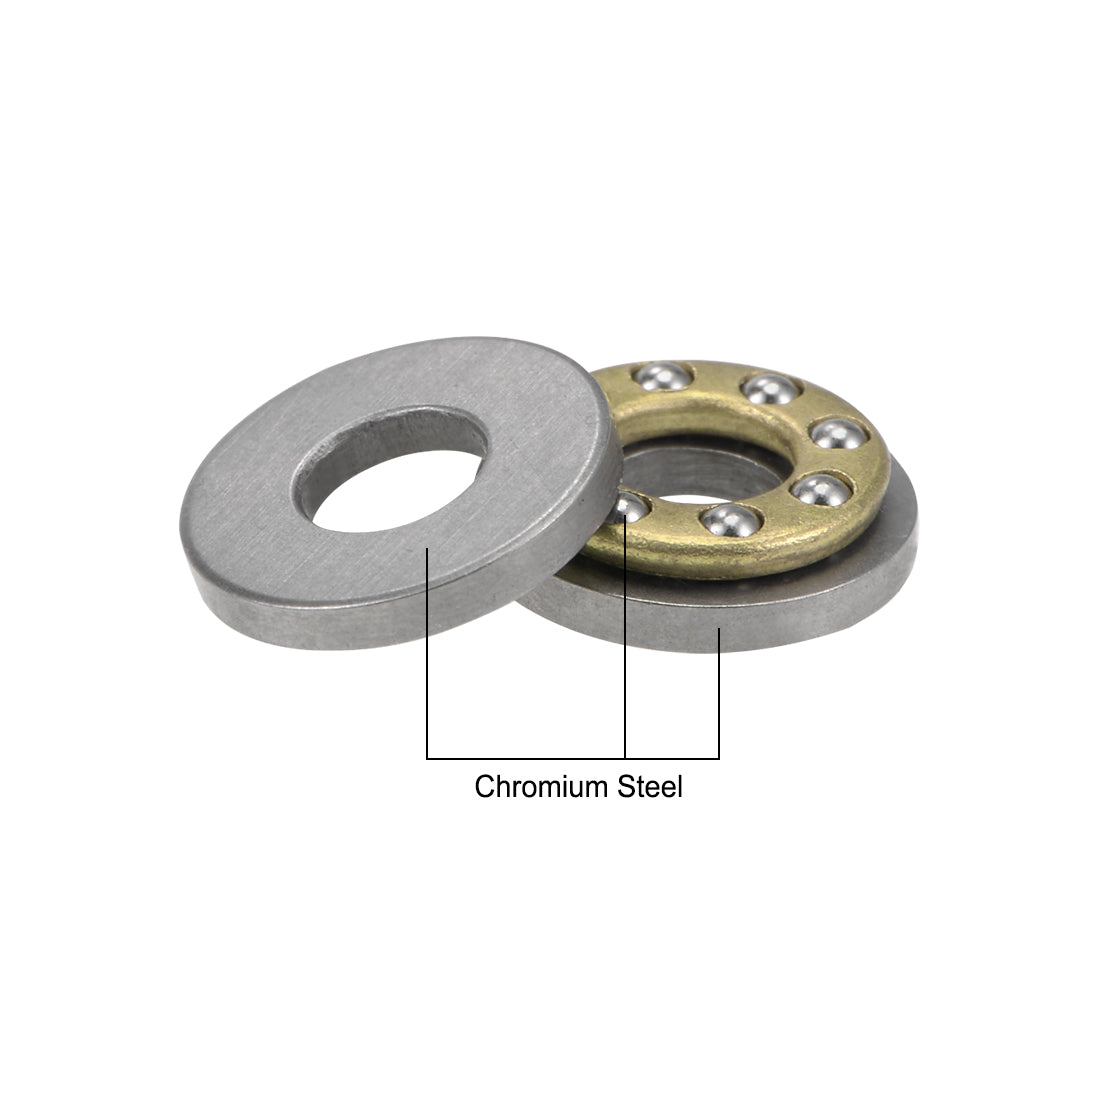 uxcell Uxcell F4-10M Miniature Thrust Ball Bearing 4x10x4mm Chrome Steel with Washer 2Pcs